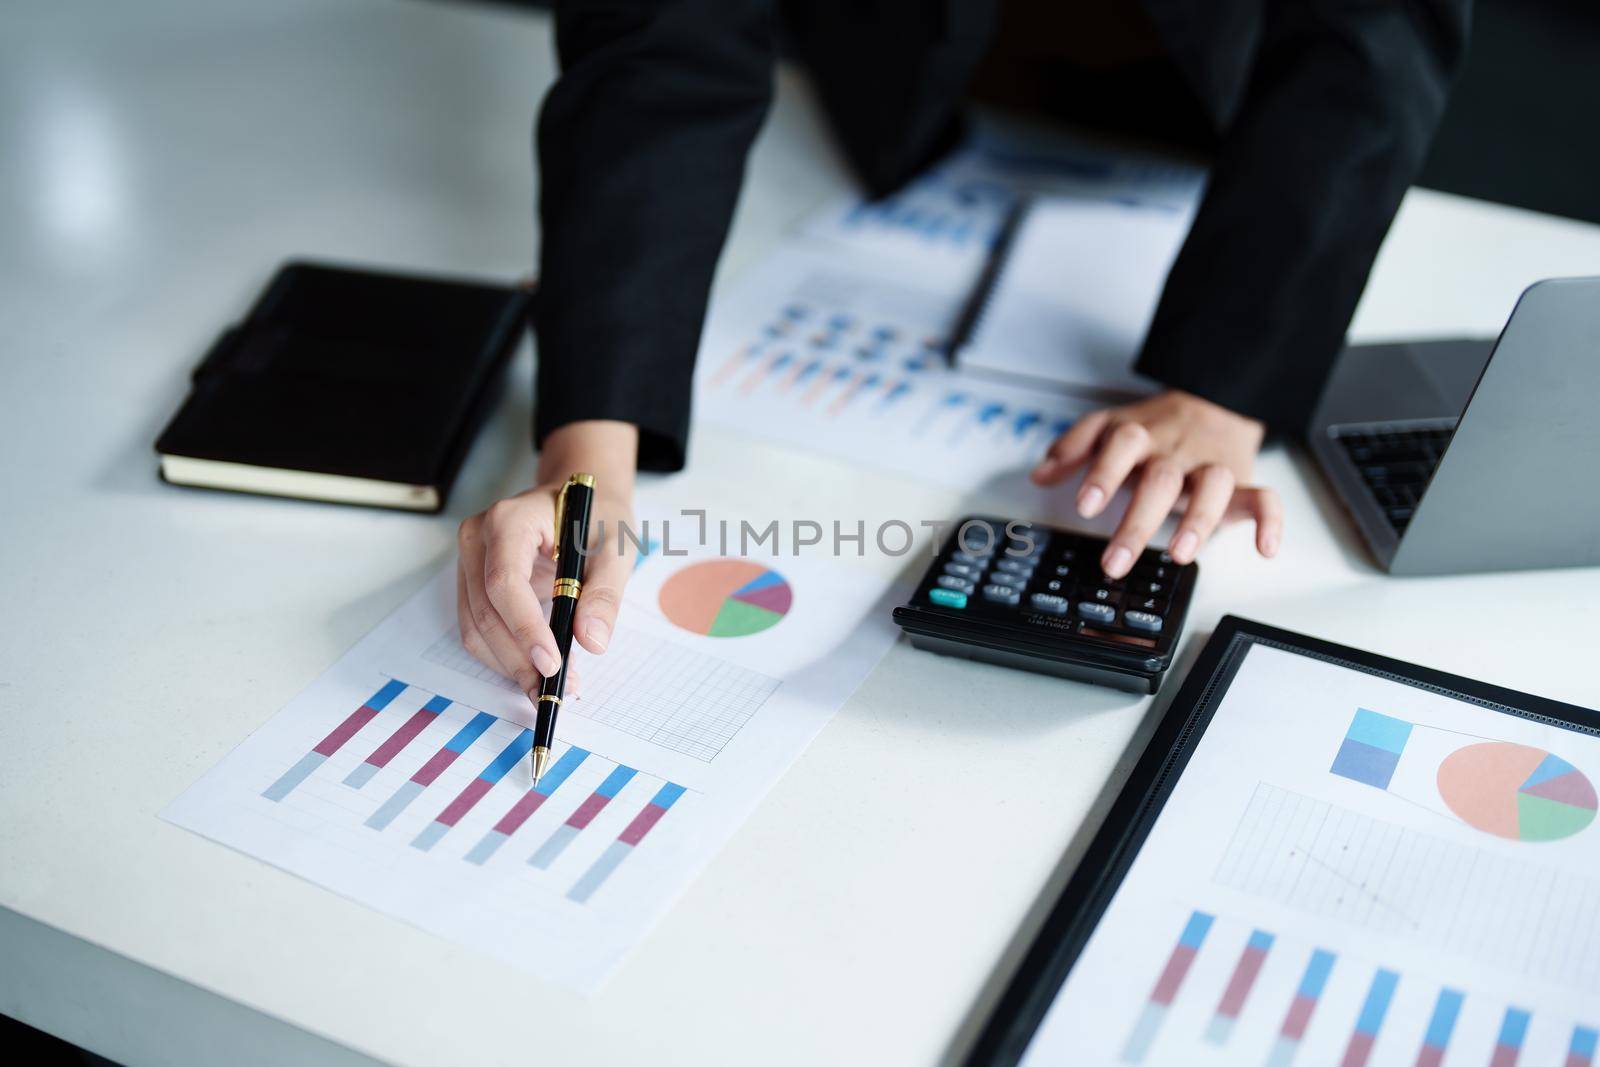 data analysis, plan, marketing, accounting, audit, asian business woman holding pen of planning marketing using statistical data sheet and calculator to present marketing plan project at meeting